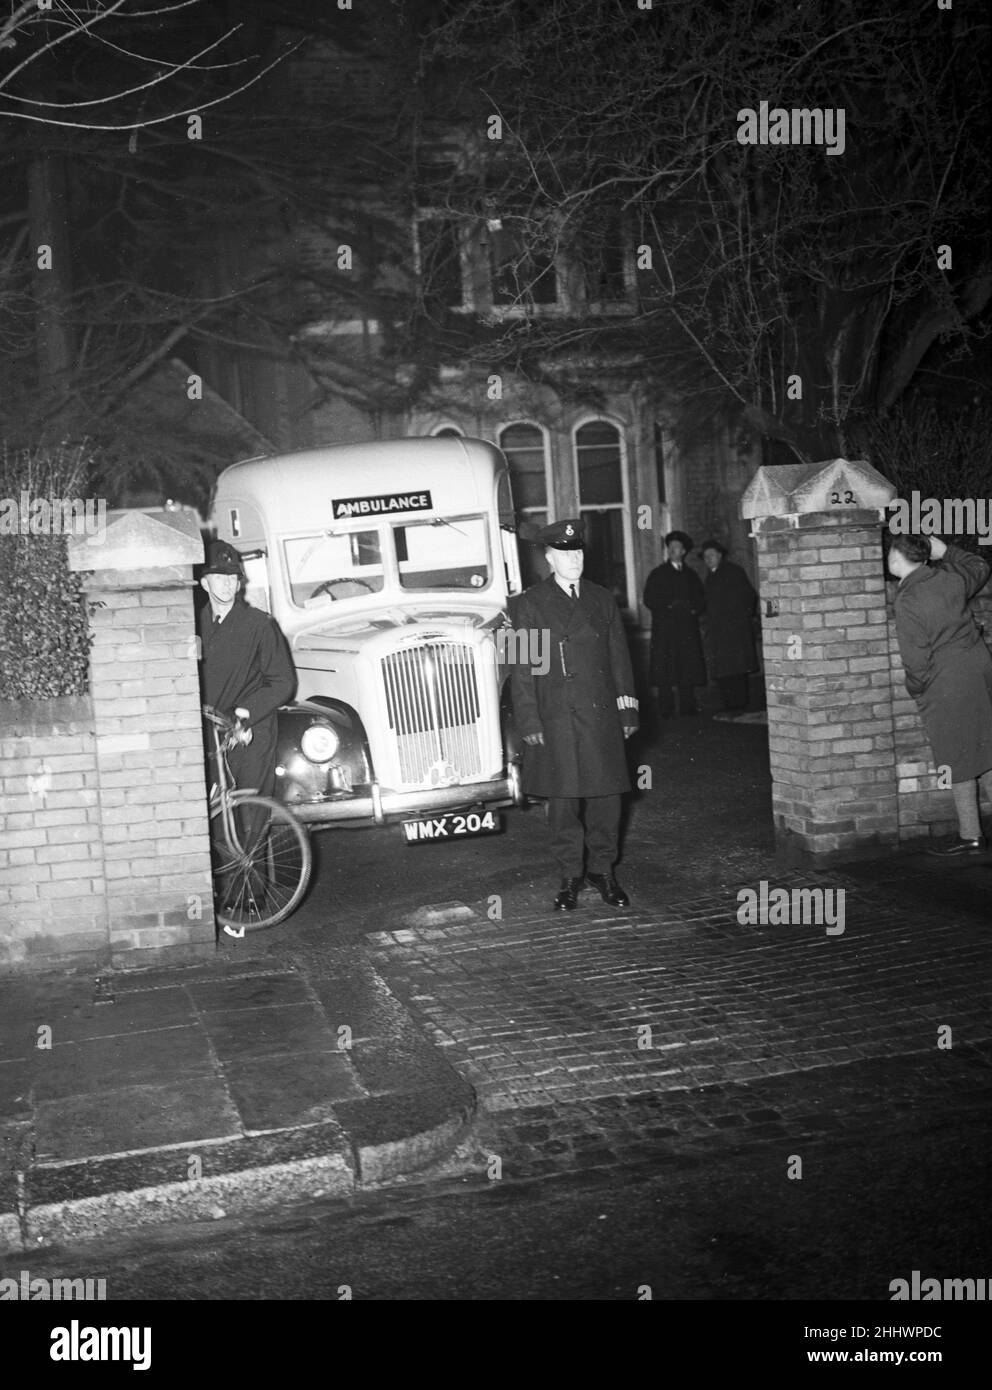 True Crime - Picture set on the murder crimes of John Donald Merrett, AK Ronald Chesney,  in 1926 and 1954. Picture shows The home of Lady Mary Menzies in Ealing, West London, murdered along with her daughter (Veronica Bonnar, Chesney's wife) by Ronald Chesney on 11th February 1954.  Night time scene with the ambulance and police on the drive.   Details on the killer and his crimes......  John Donald Merrett, a University student, was tried at Edinburgh for the murder of his mother in 1926, Bertha Merrett, and for uttering forged cheques upon her banking account. The authorities at first belie Stock Photo